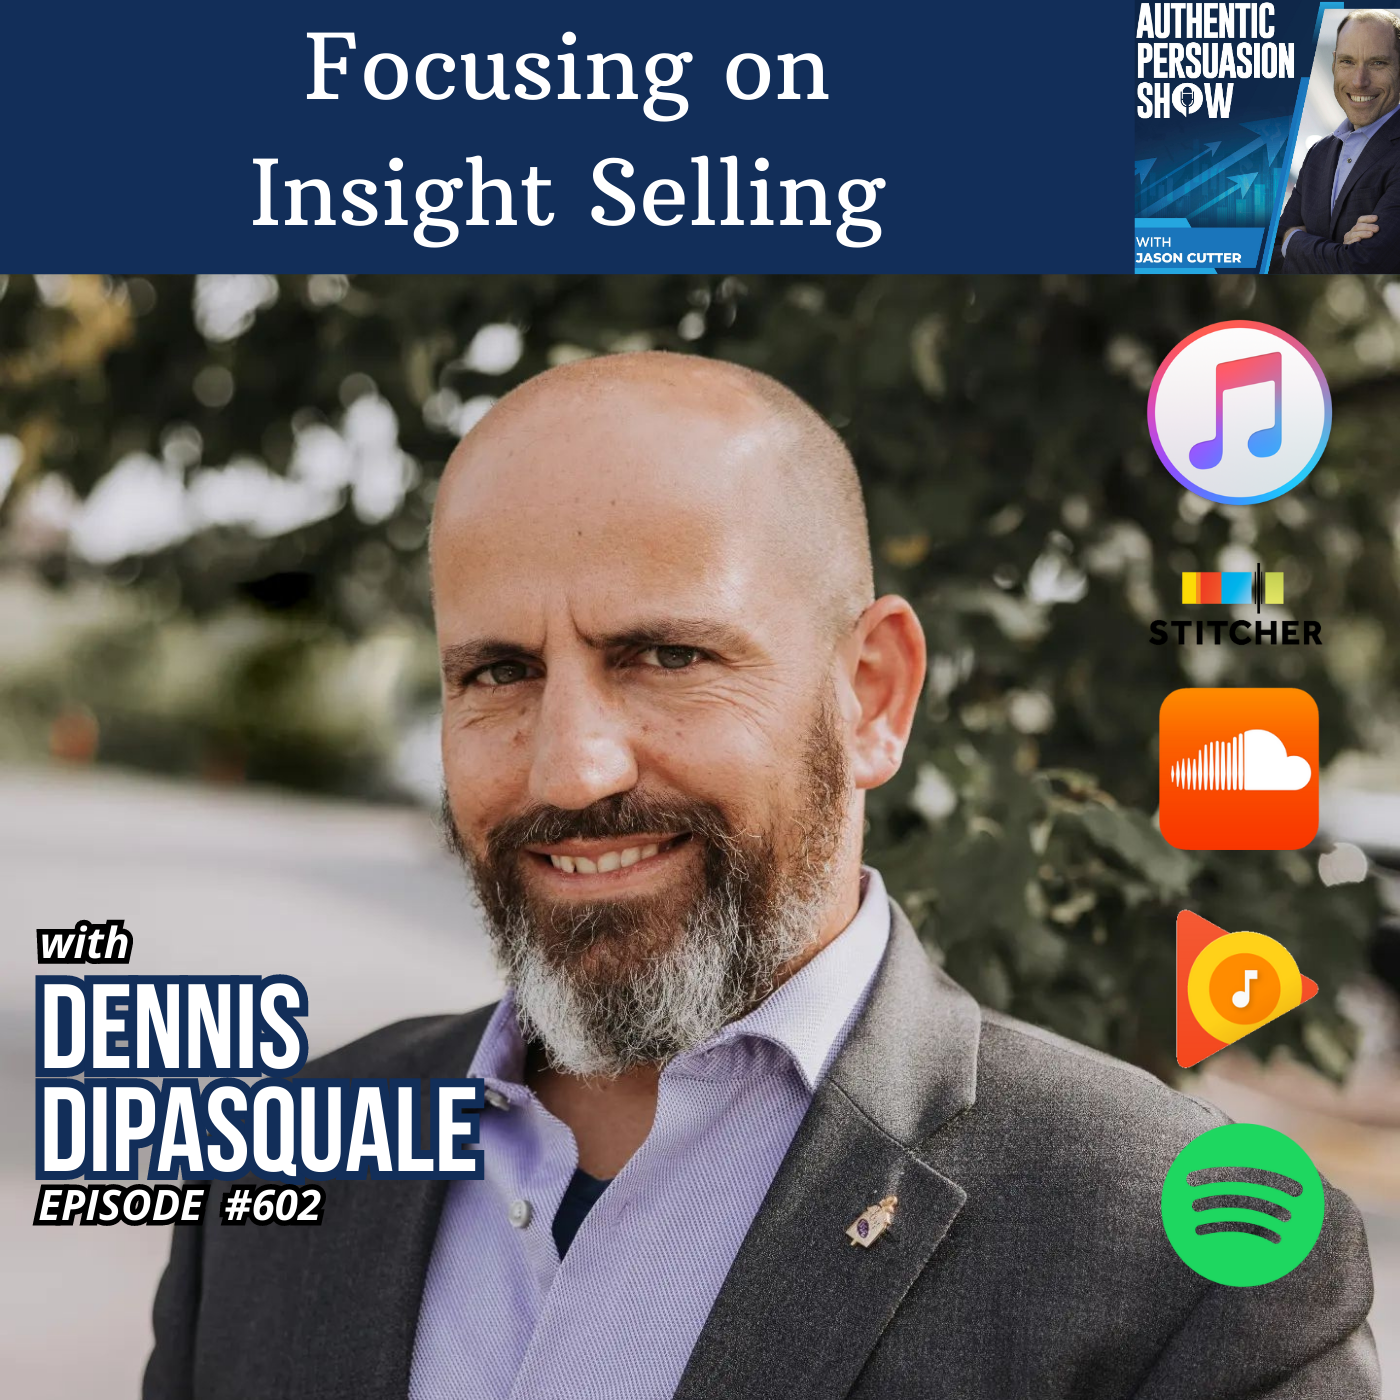 [602] Focusing on Insight Selling, with Dr. Dennis DiPasquale from the University of Florida